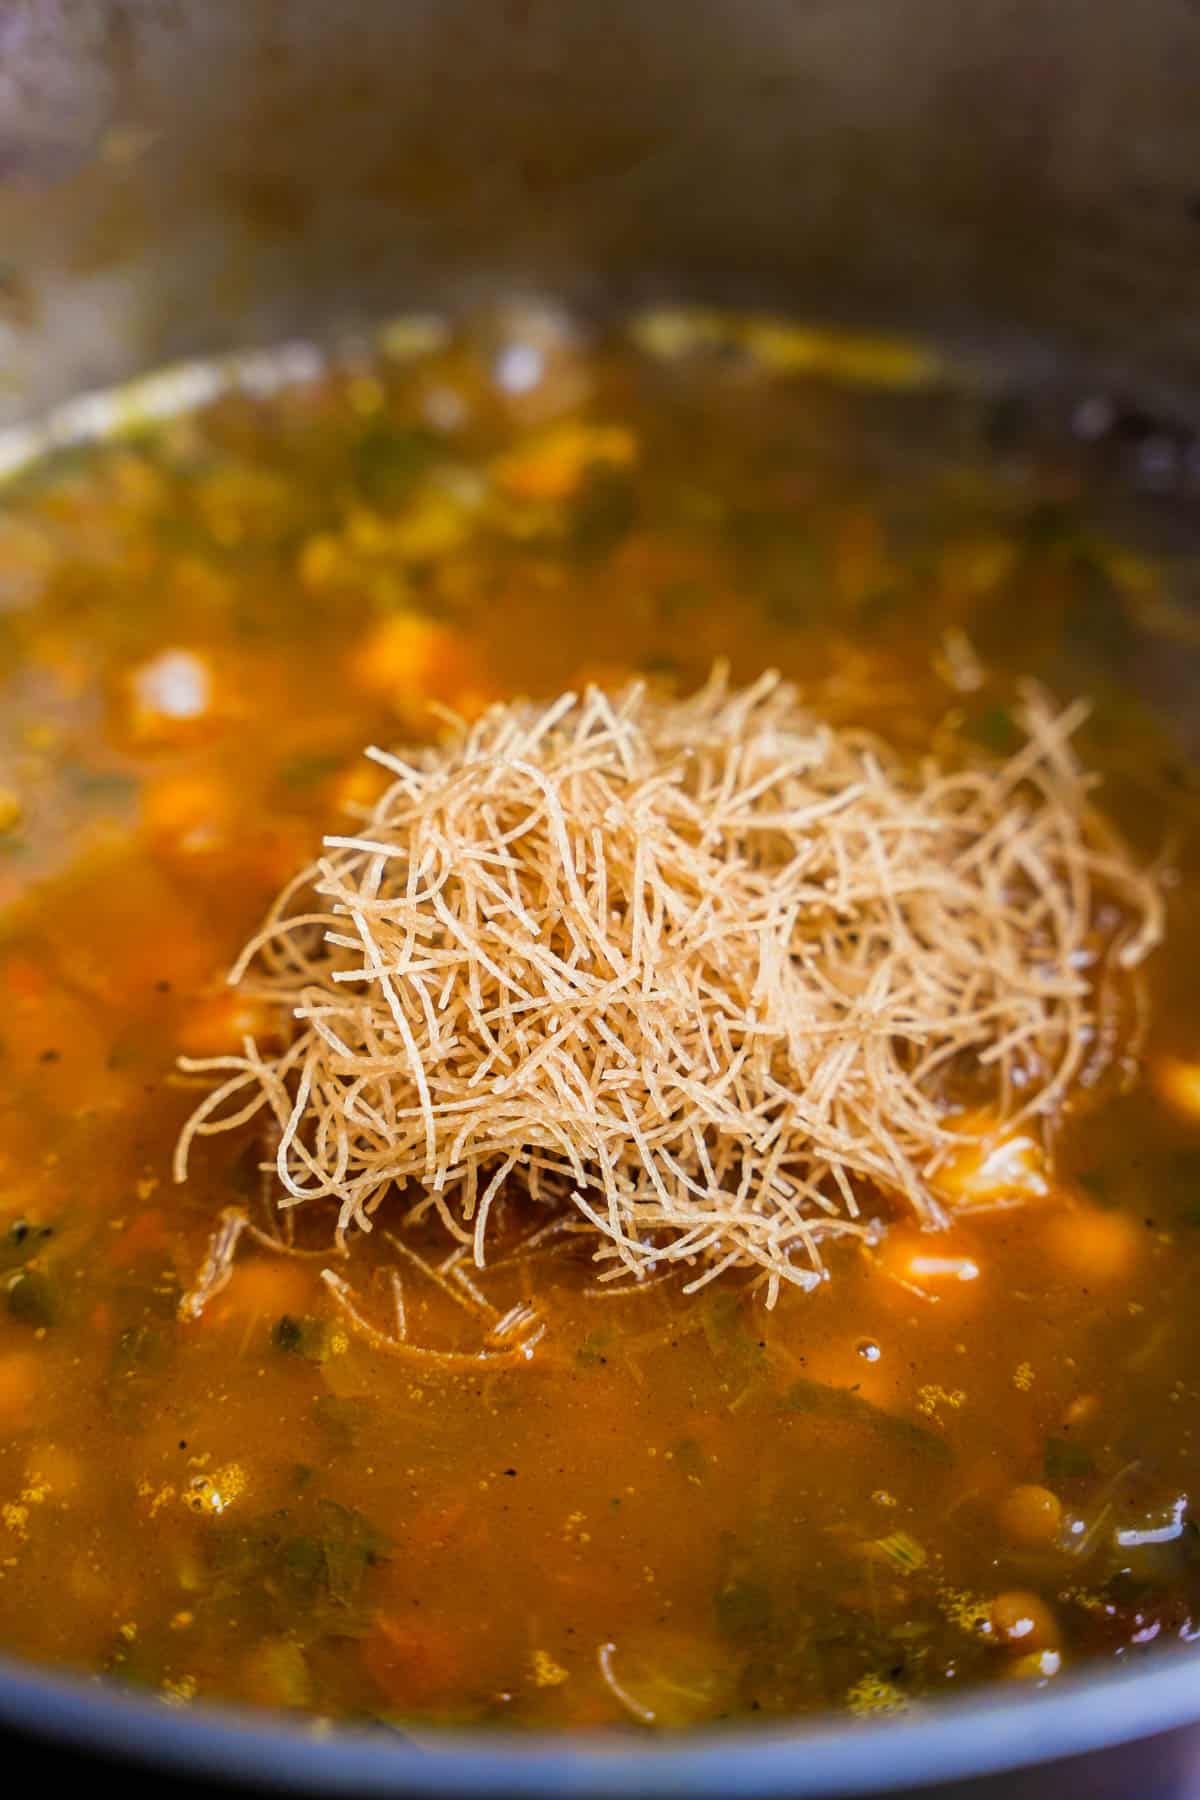 Vermicelli is added to the pot of soup.